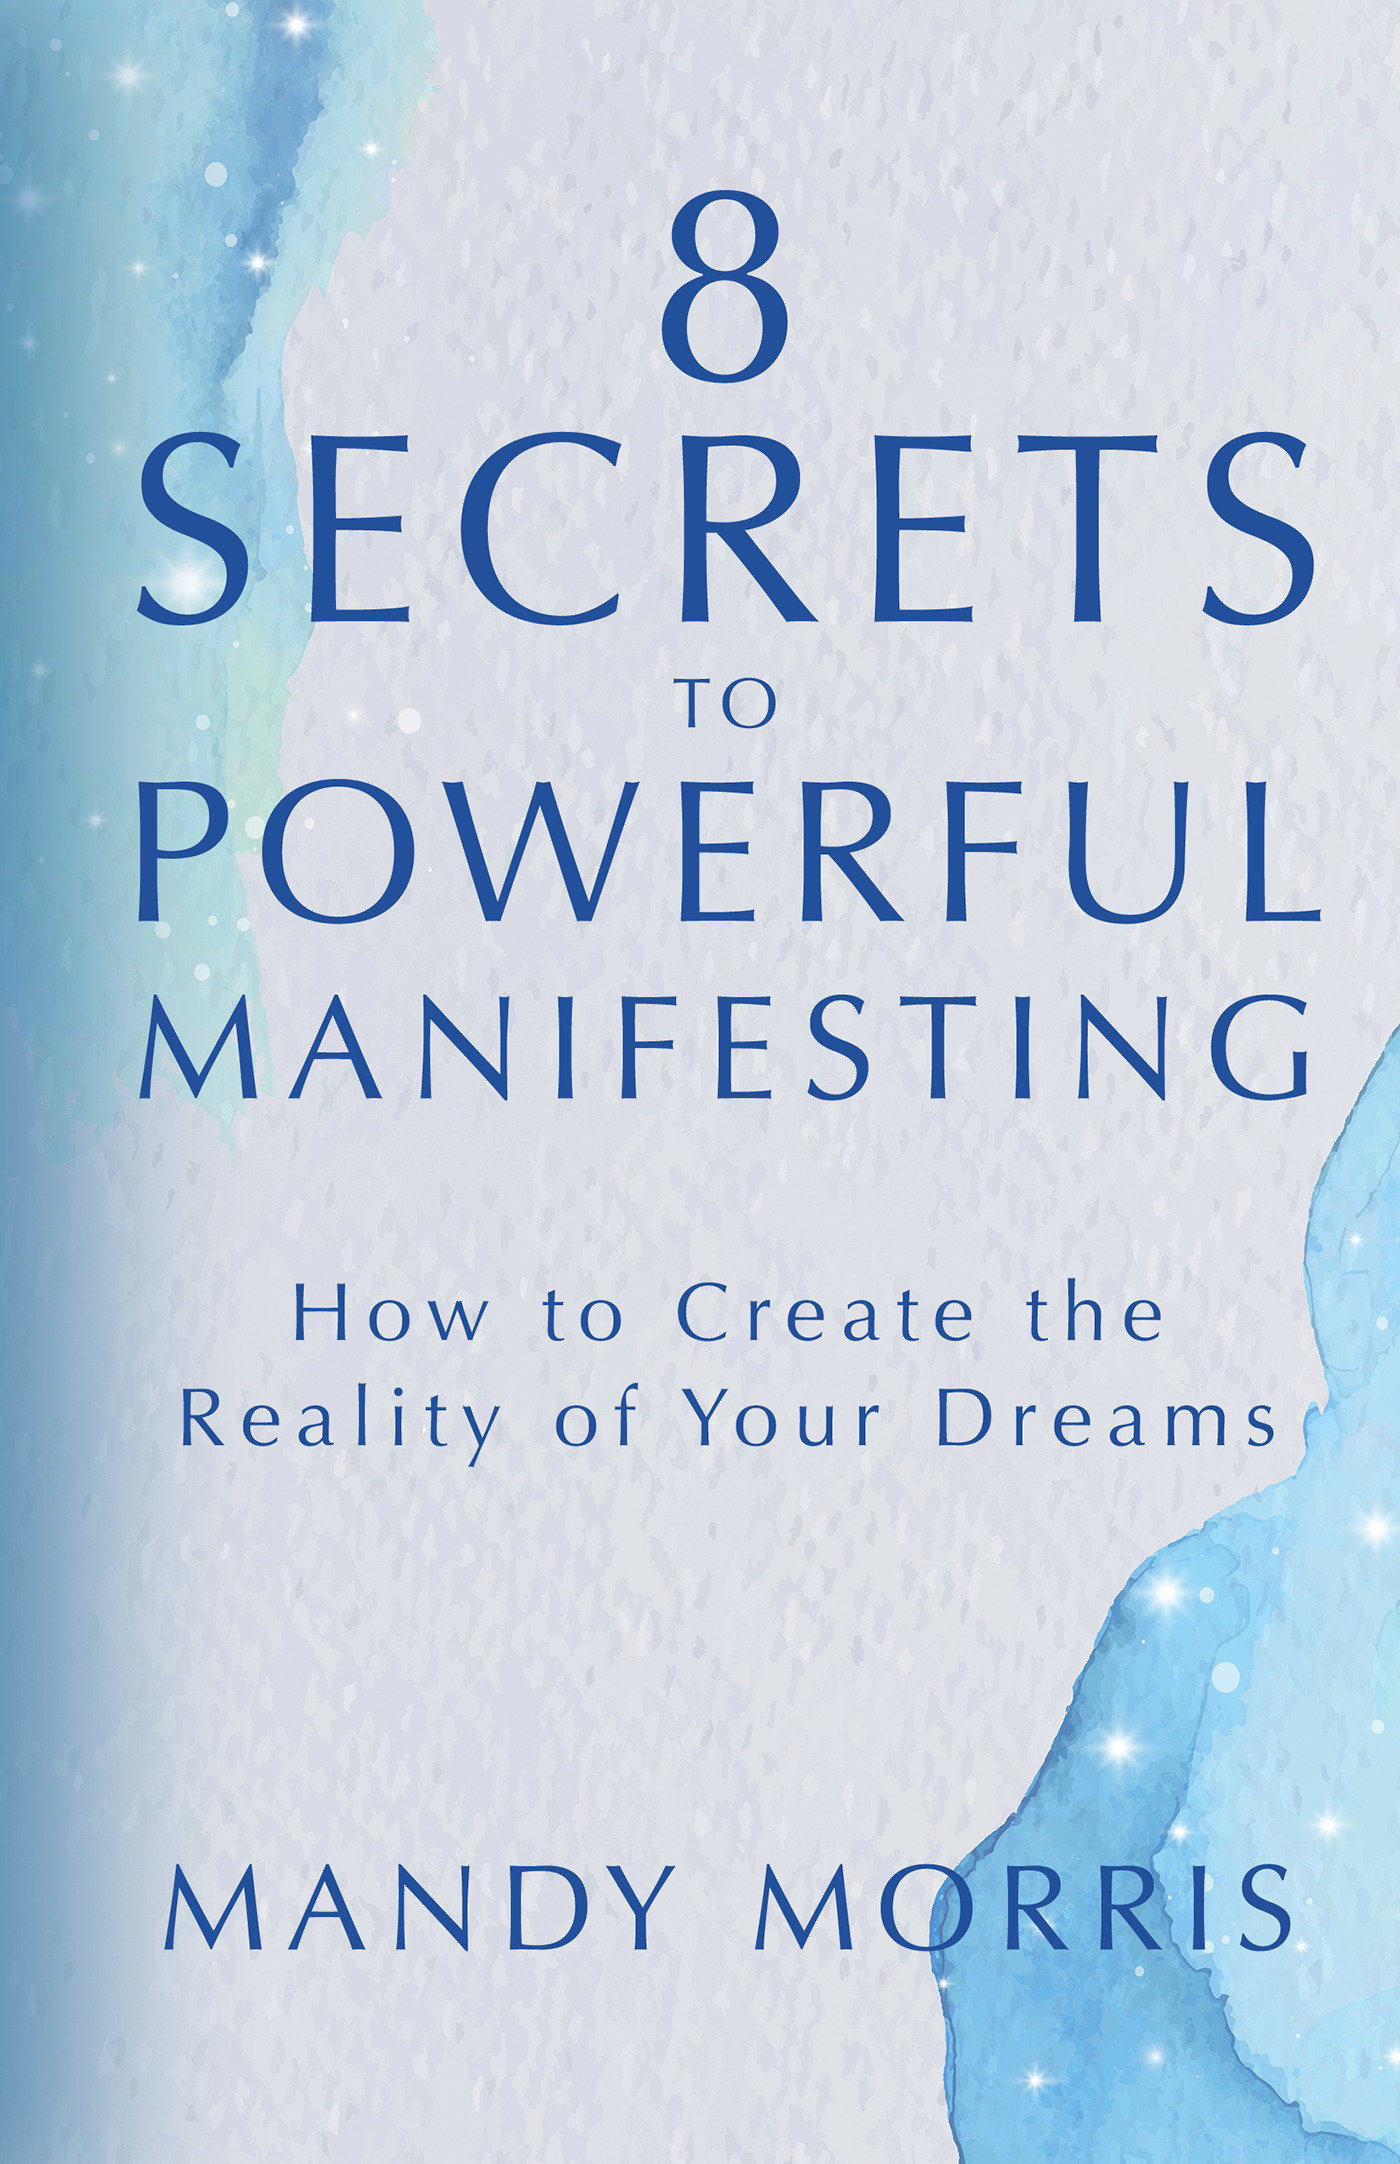 8 Secrets To Powerful Manifesting (Hardcover Book)